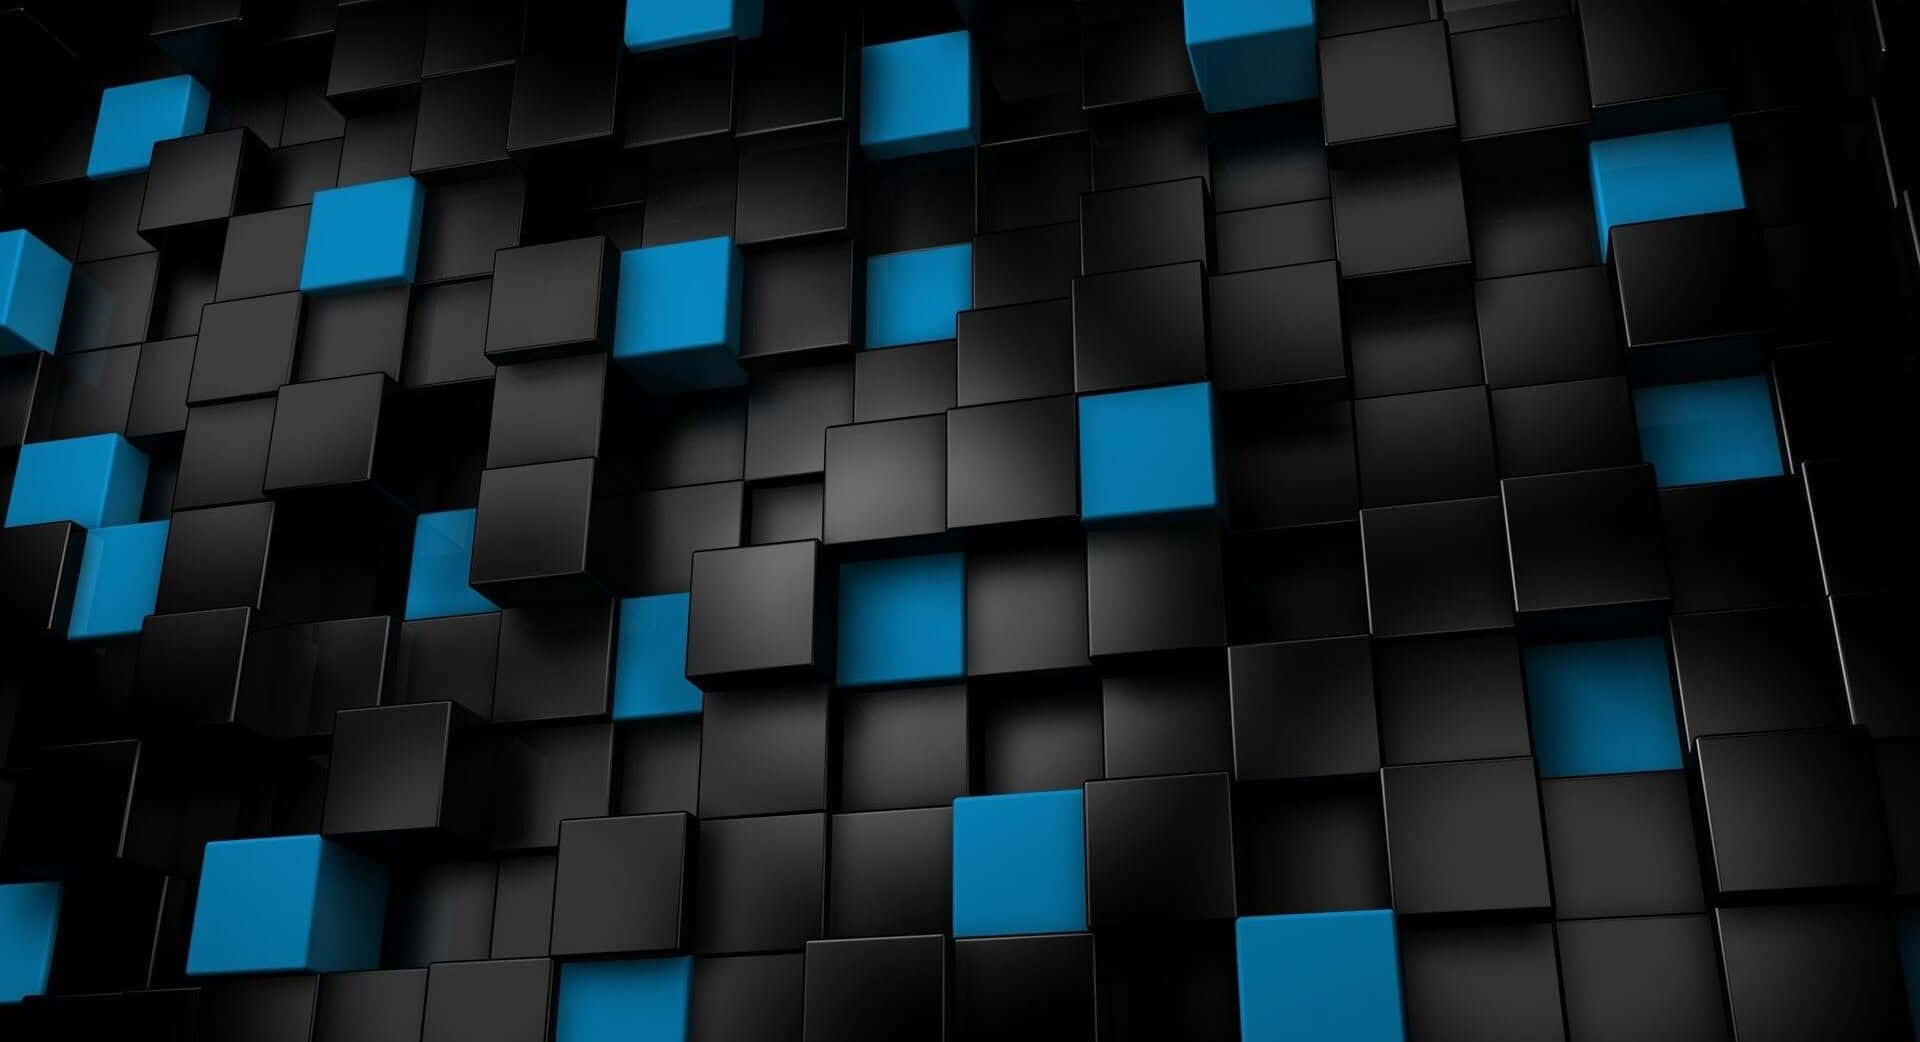 "Abstract Digitally Generated Artwork Featuring Black and Blue Colour Scheme"